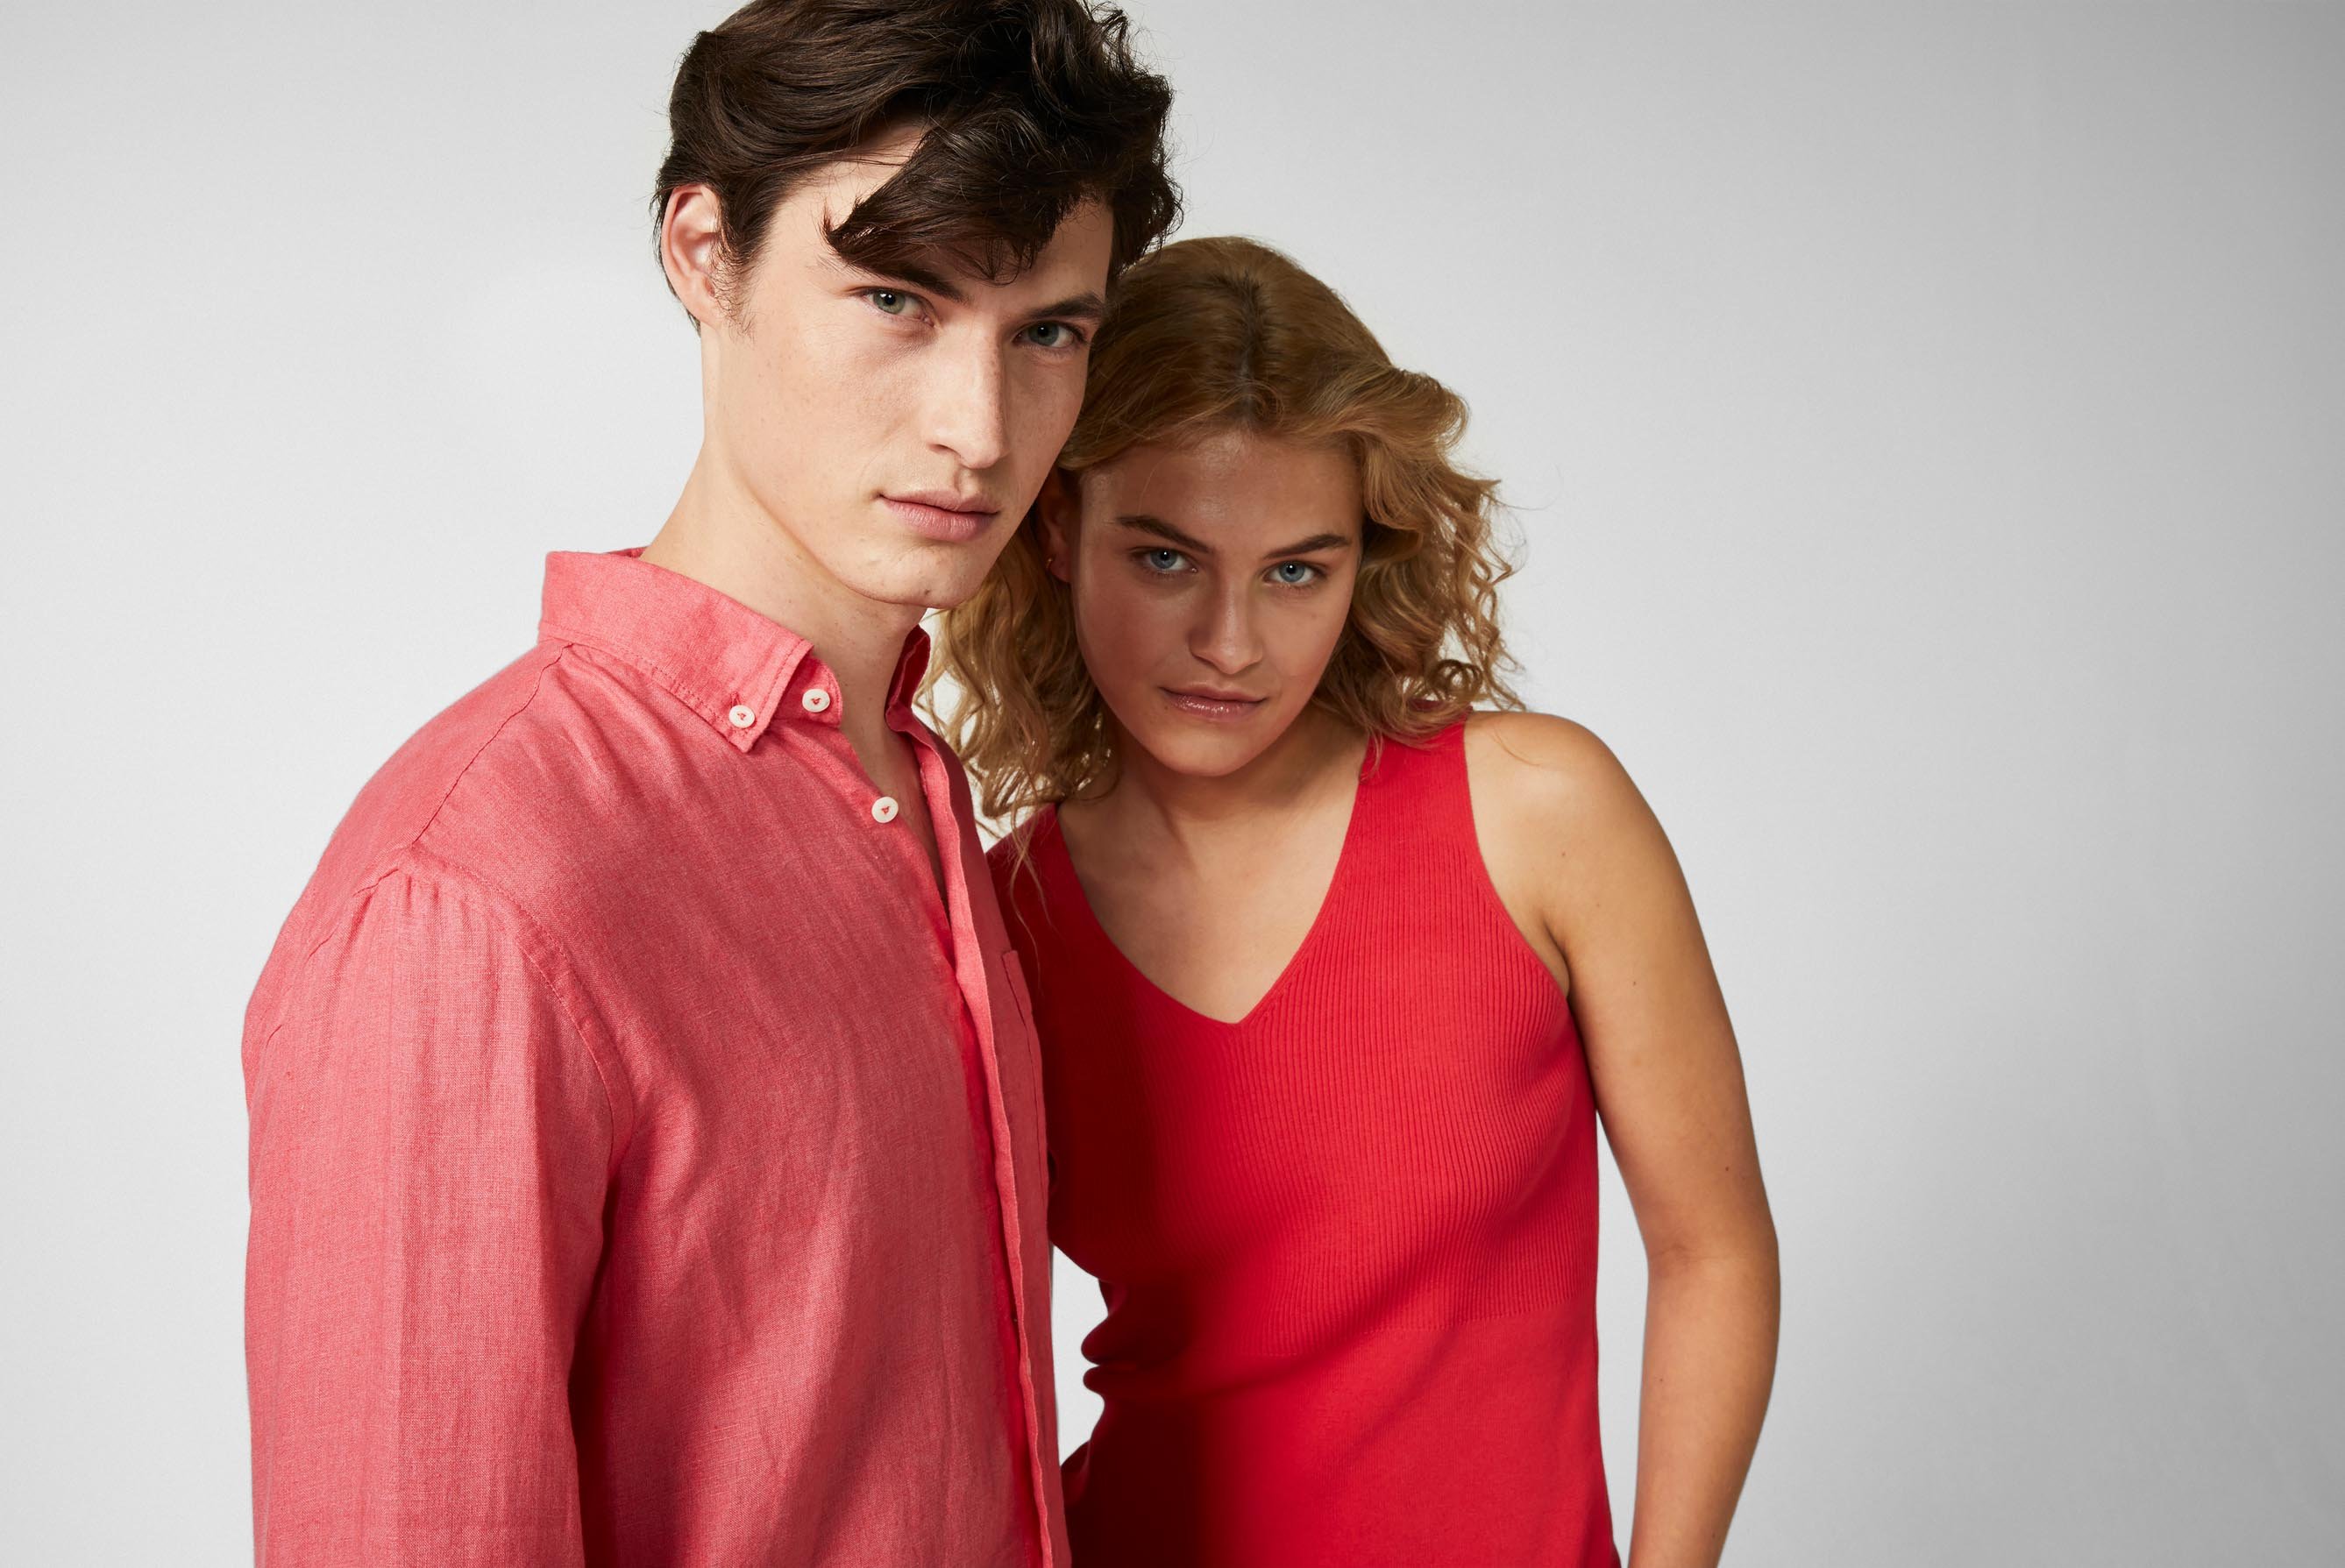 Tops & T-Shirts+Slim fit cotton tank top rot/rose+09.9966..S00192.540.XS